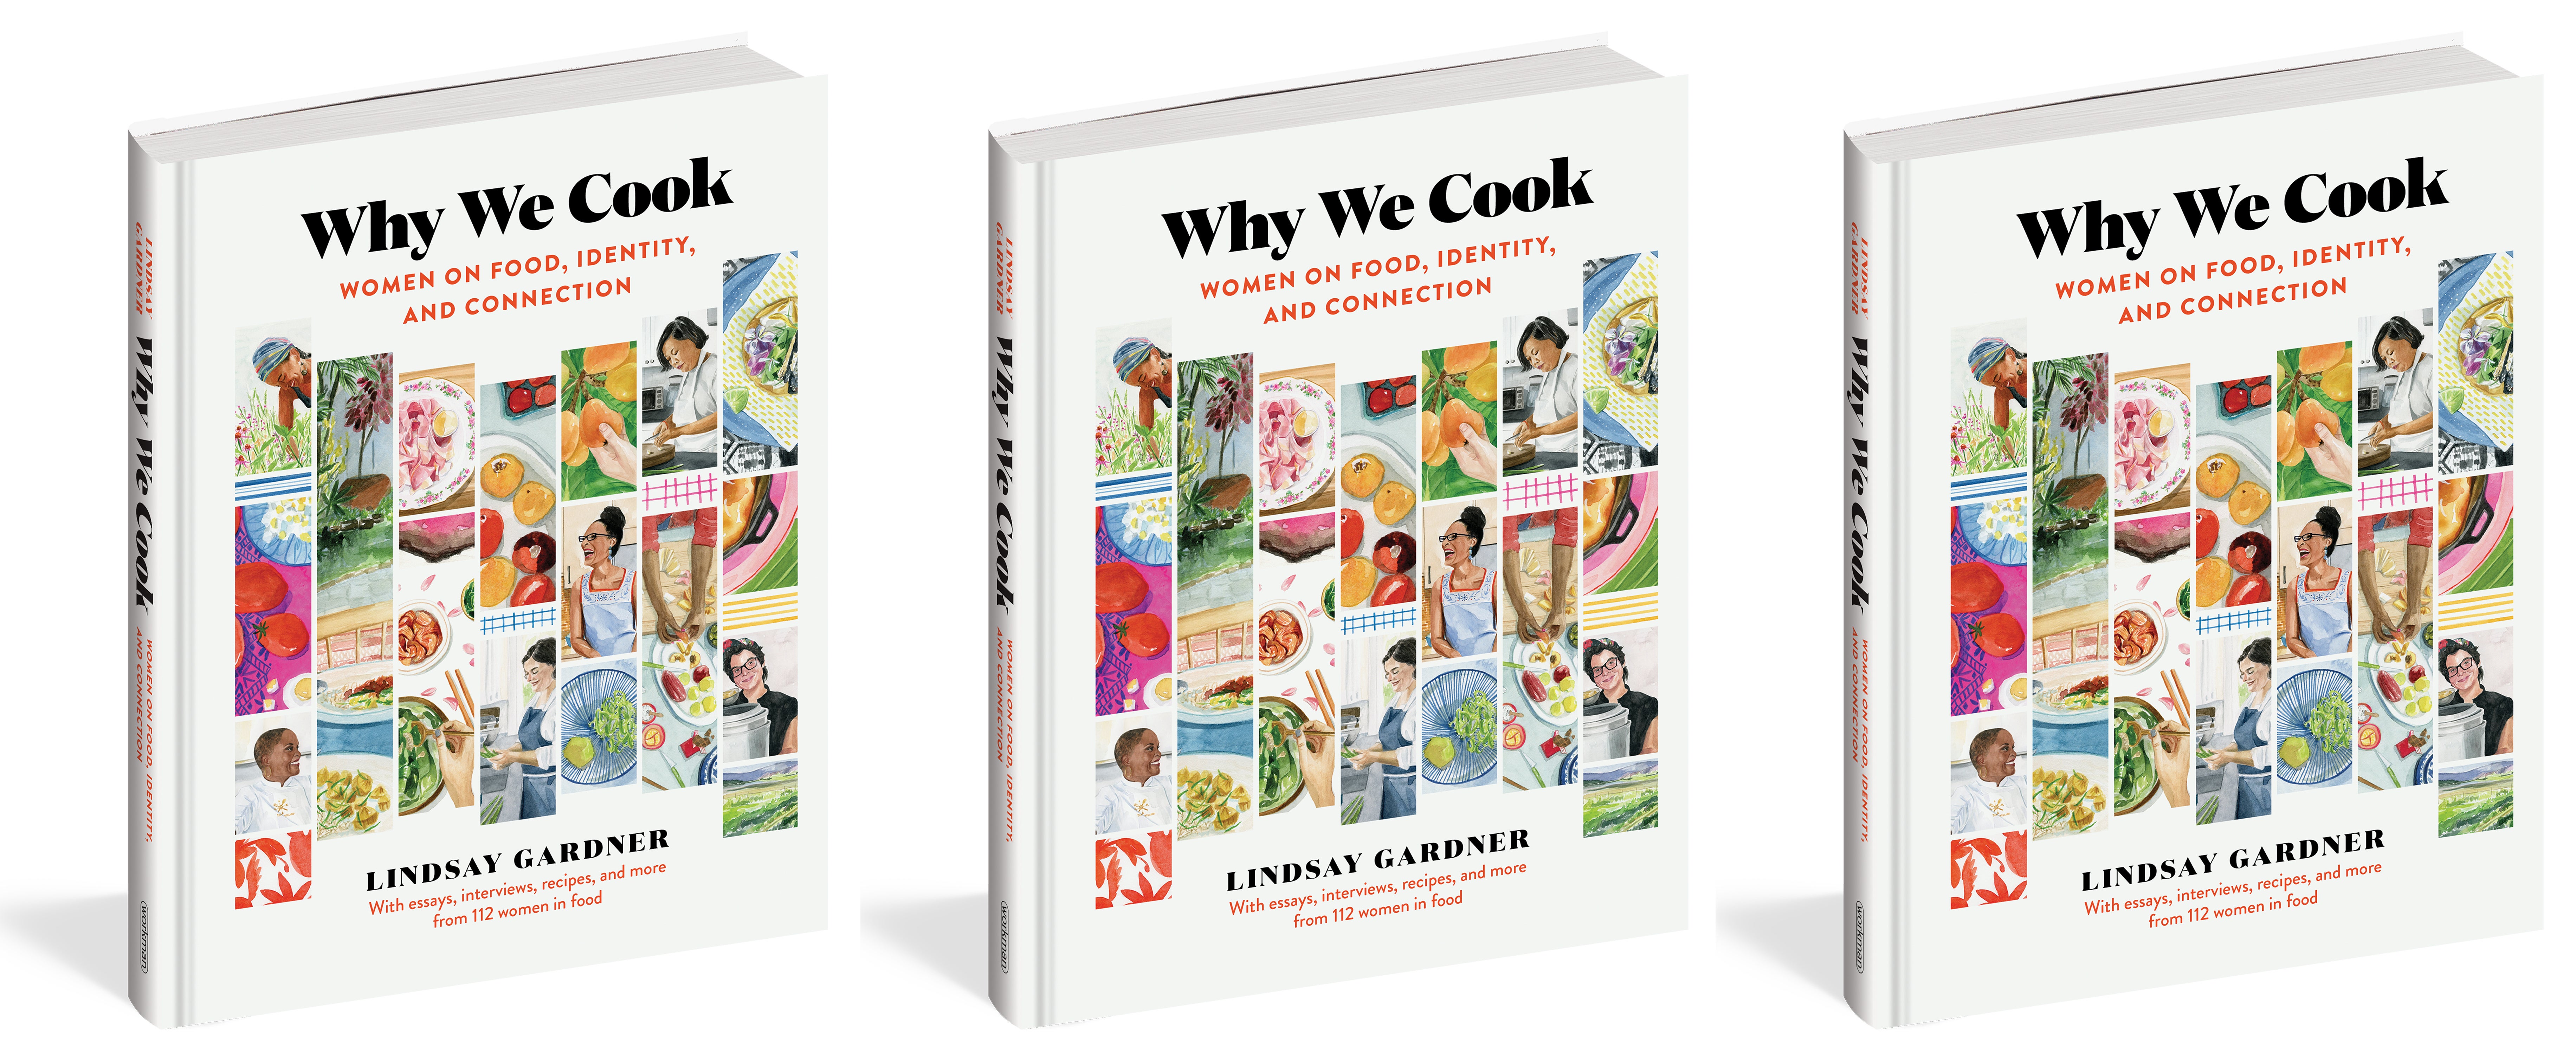 Why We Cook: Women on Food, Identity, and Connection by Lindsay Gardner (Lindsay Gardner/PA)